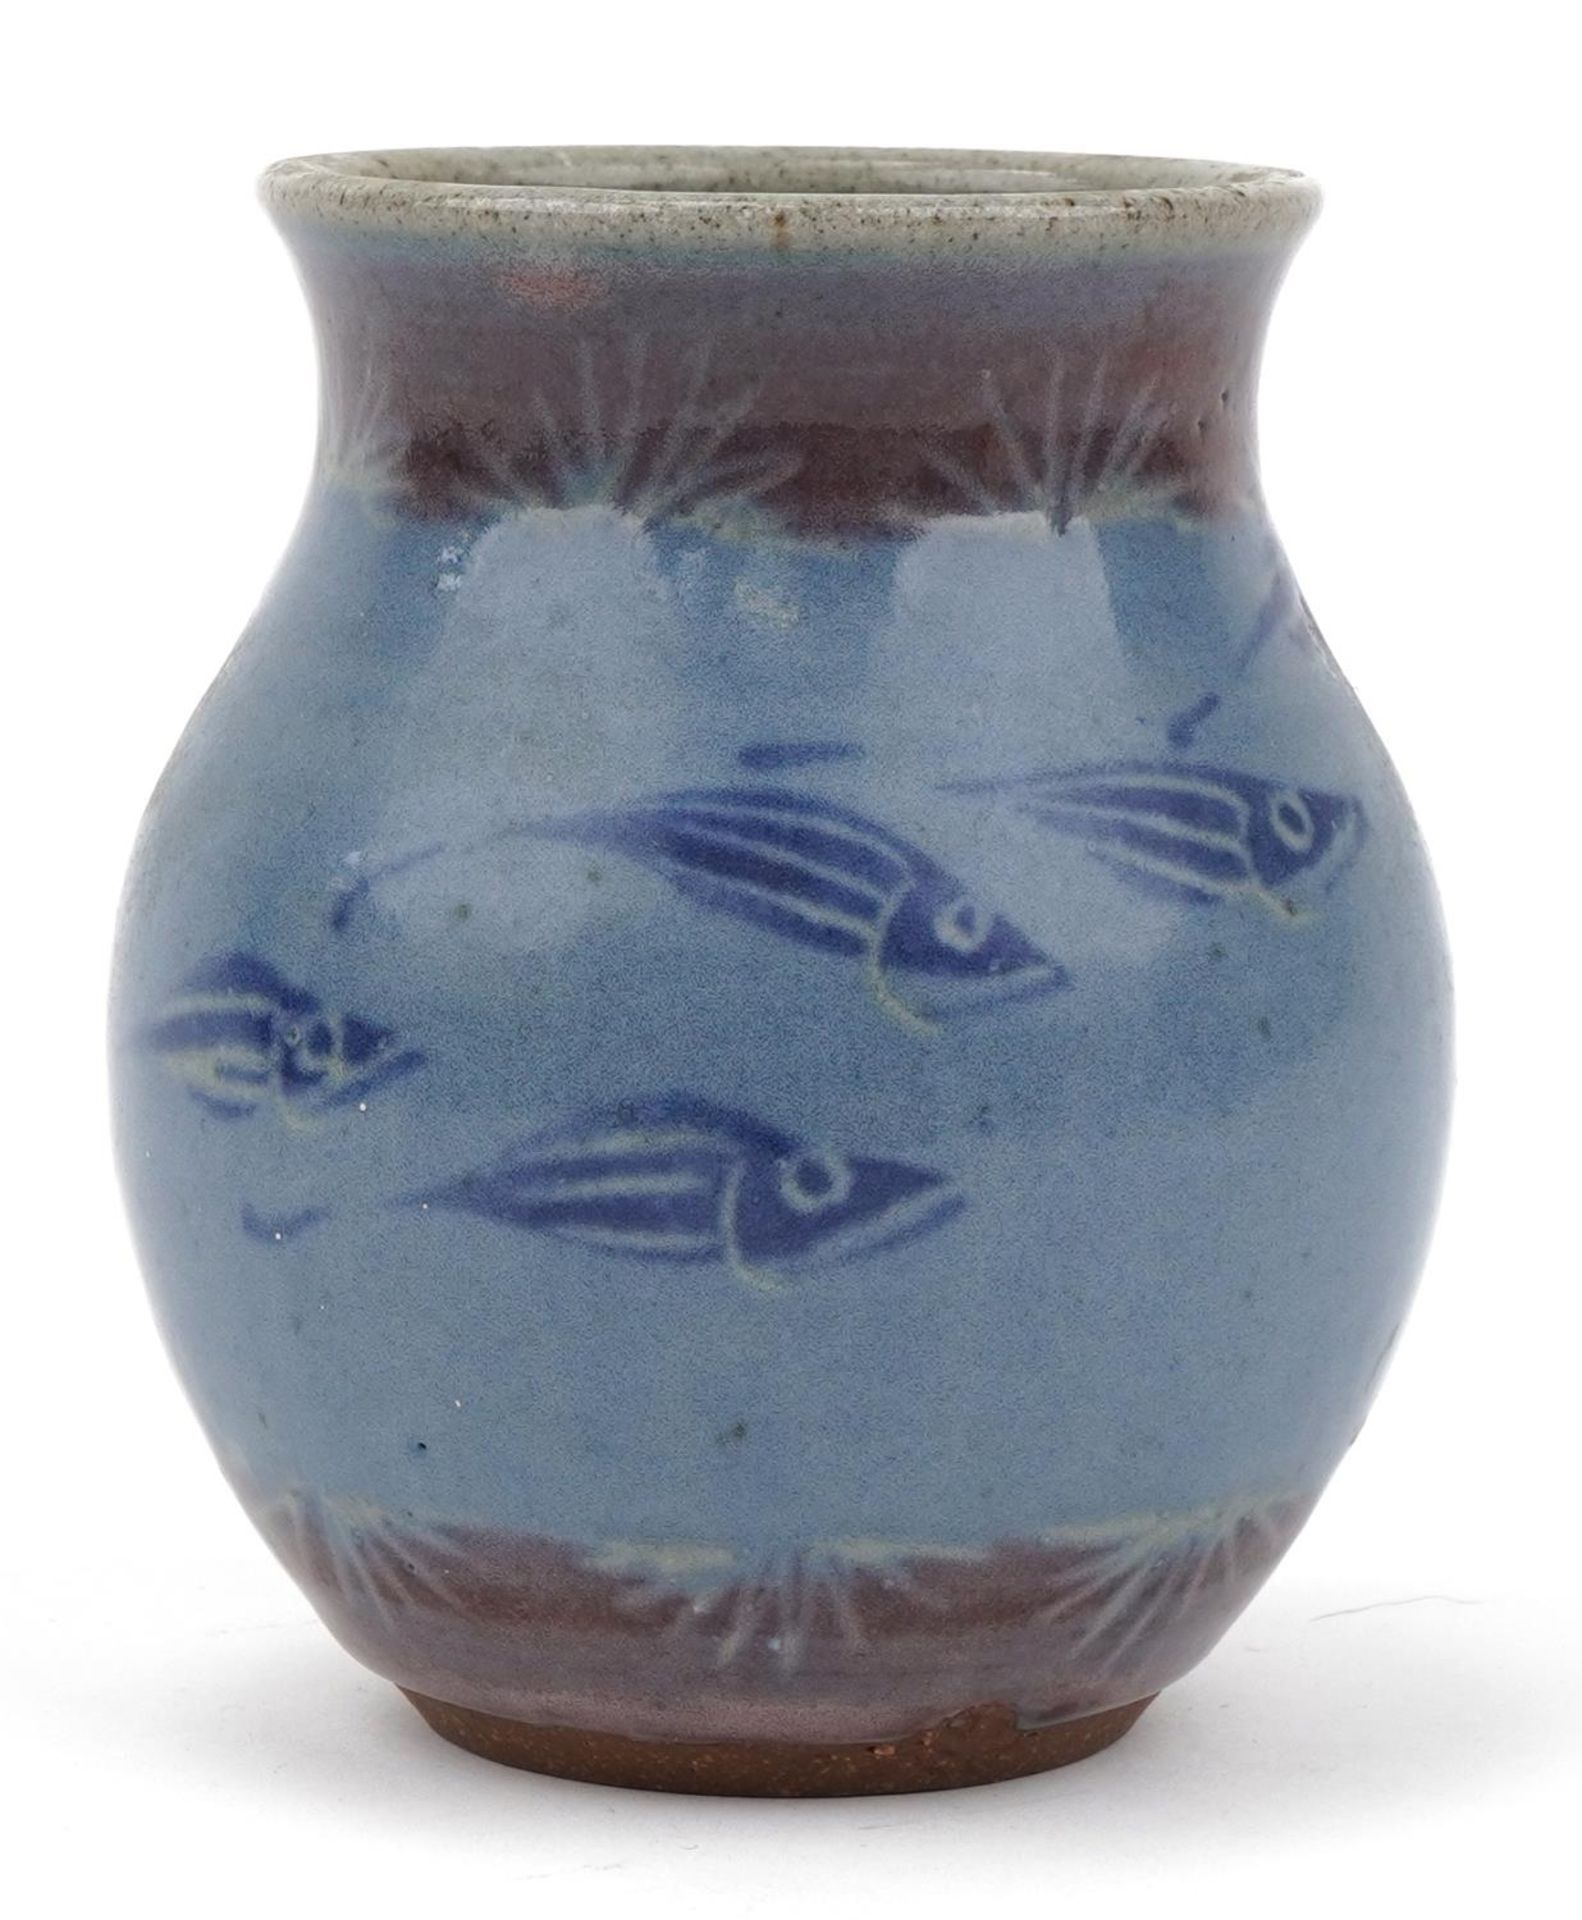 St Ives studio pottery vase hand painted with stylised fish, 12cm high - Image 2 of 6